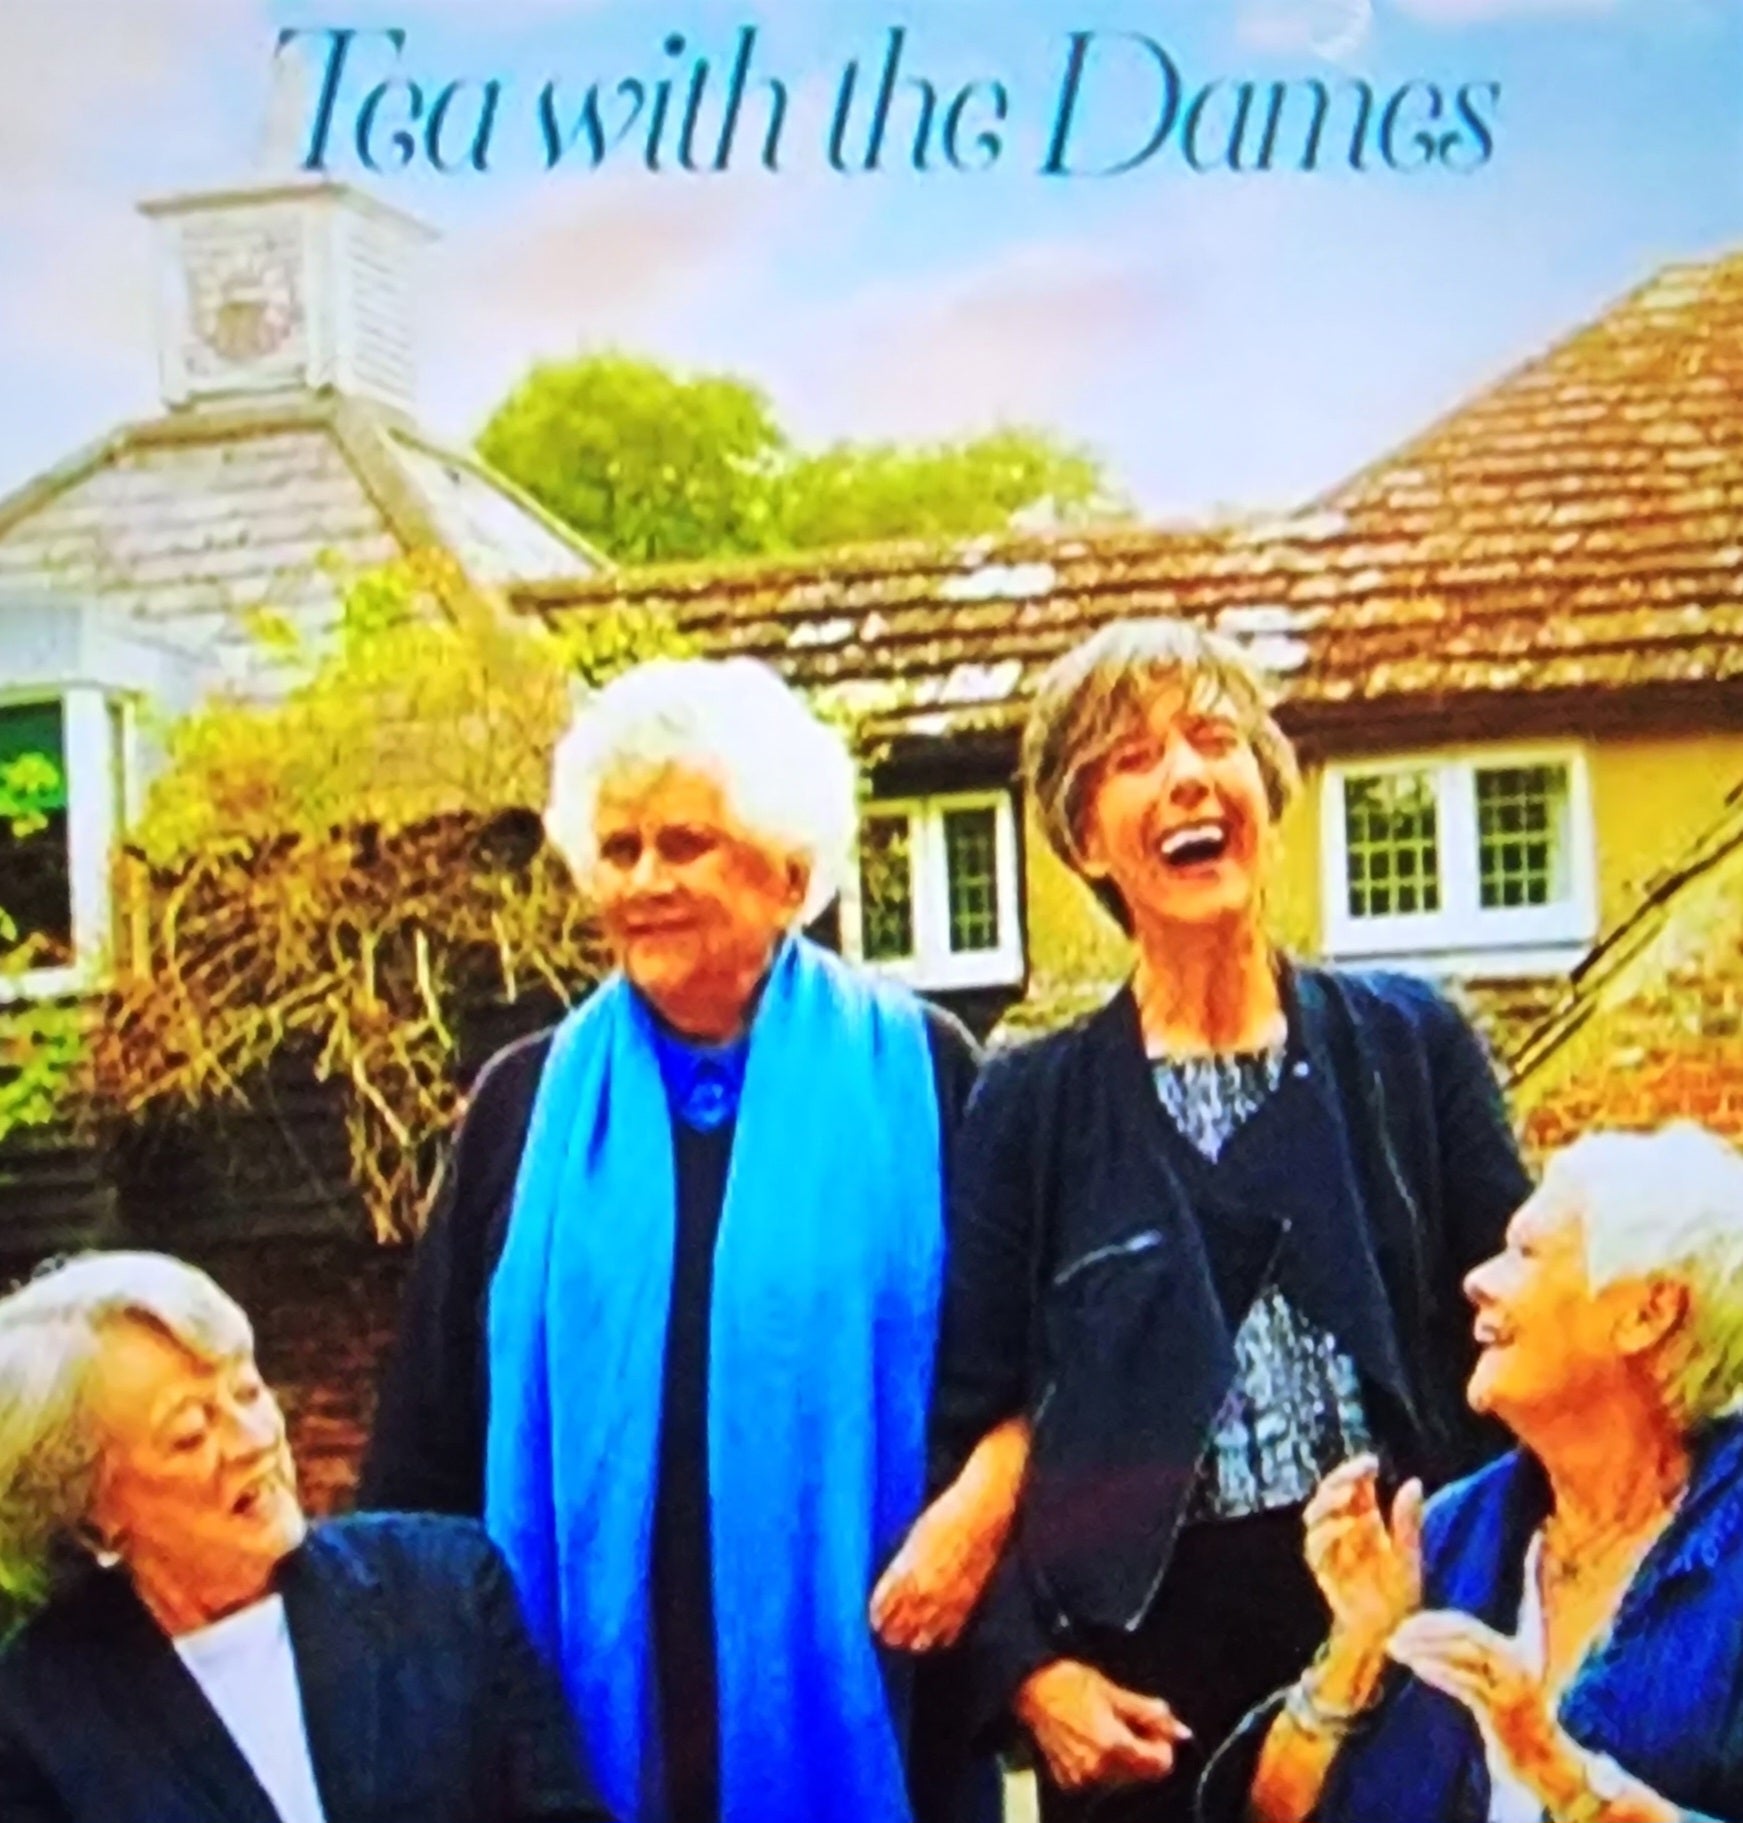 TEA WITH THE DAMES (2018) Maggie Smith, Judi Dench, Eileen Atkins, Joan Plowright